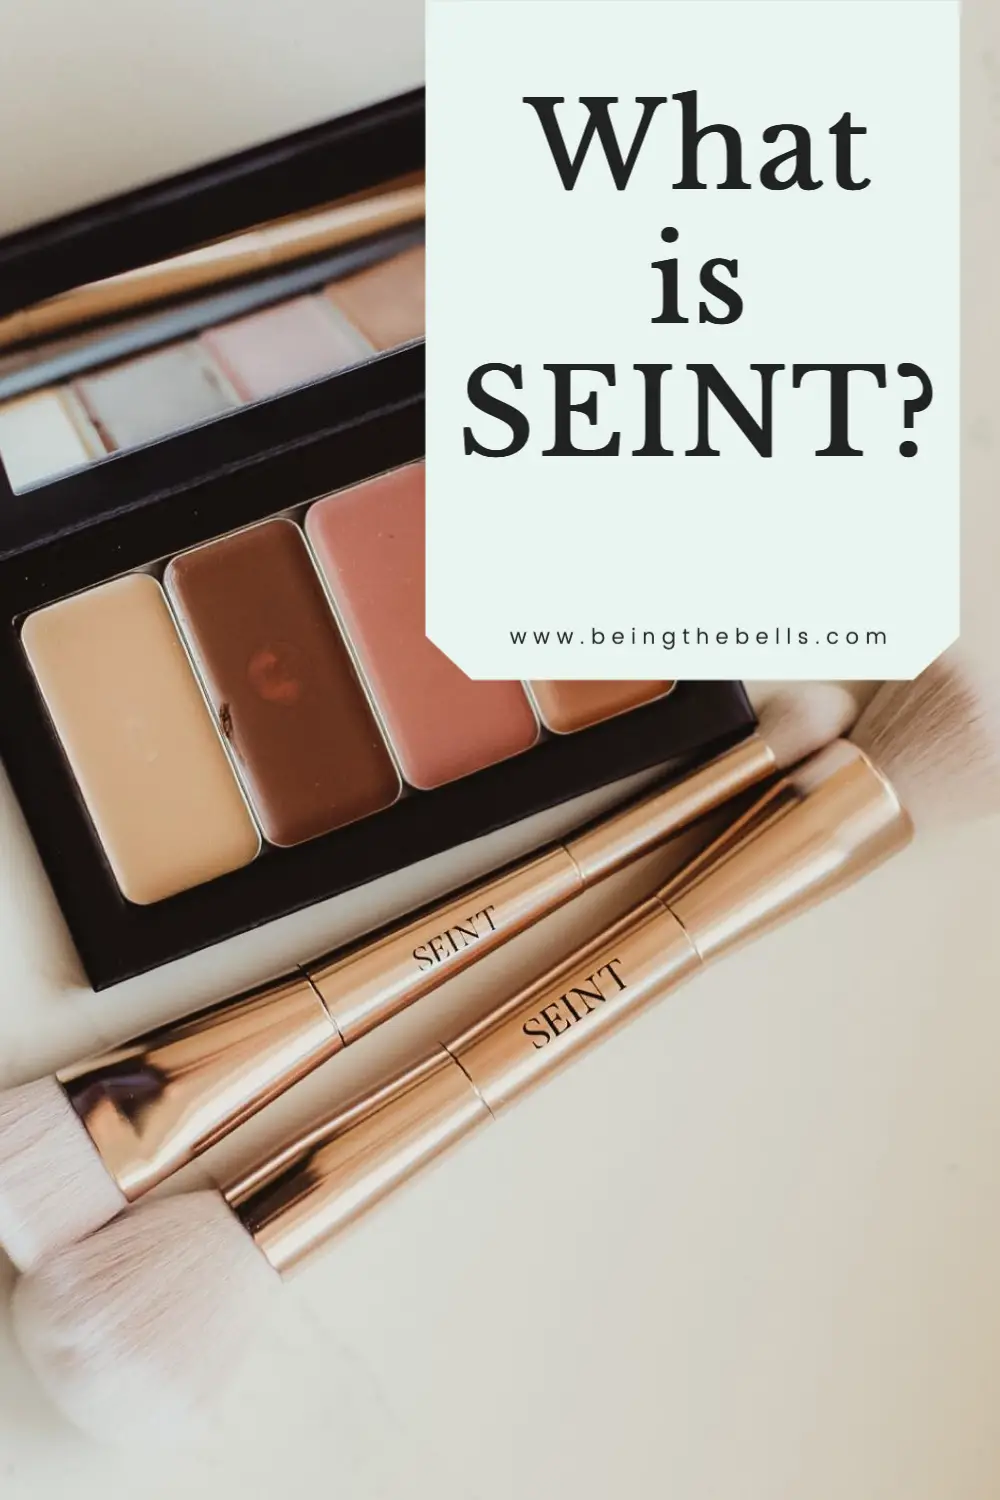 What is Seint?